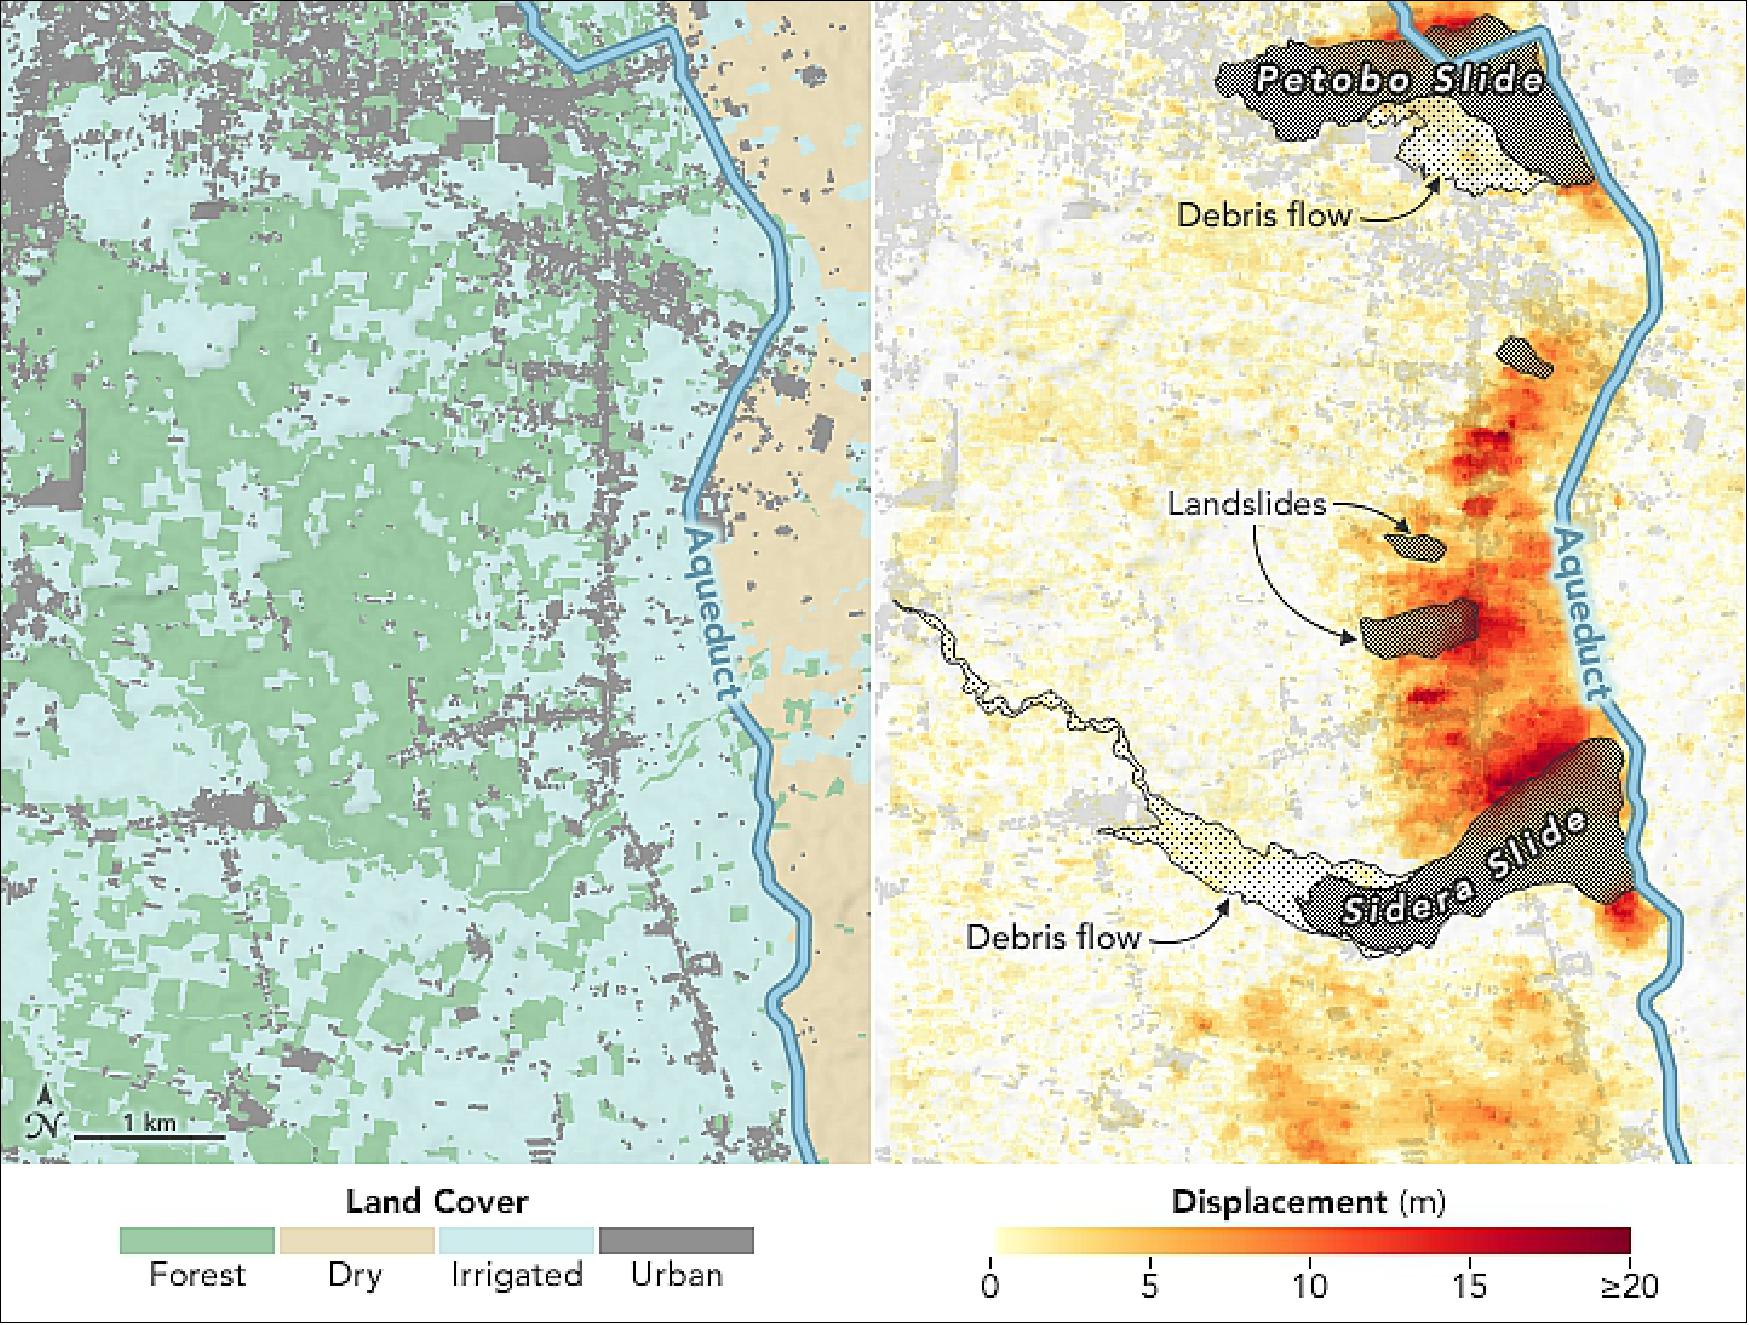 Figure 19: These maps made from data provided by Kyle Bradley of Nanyang Technological University. Provoked by damage maps, Bradley and colleagues gathered land-cover maps plus visible satellite imagery taken by the commercial satellite company Planet just before and after the Palu earthquake in order to determine where and why the land deformed and slid. They used software to calculate horizontal land displacement, particularly in areas around the aqueduct (image credit: Planet and NASA Earth Observatory using data courtesy of Bradley, K. et al. (2019). Story by Michael Carlowicz, with reporting from Esprit Smith and Carol Rasmussen, NASA/JPL and Shireen Federico, Nanyang Technological University)